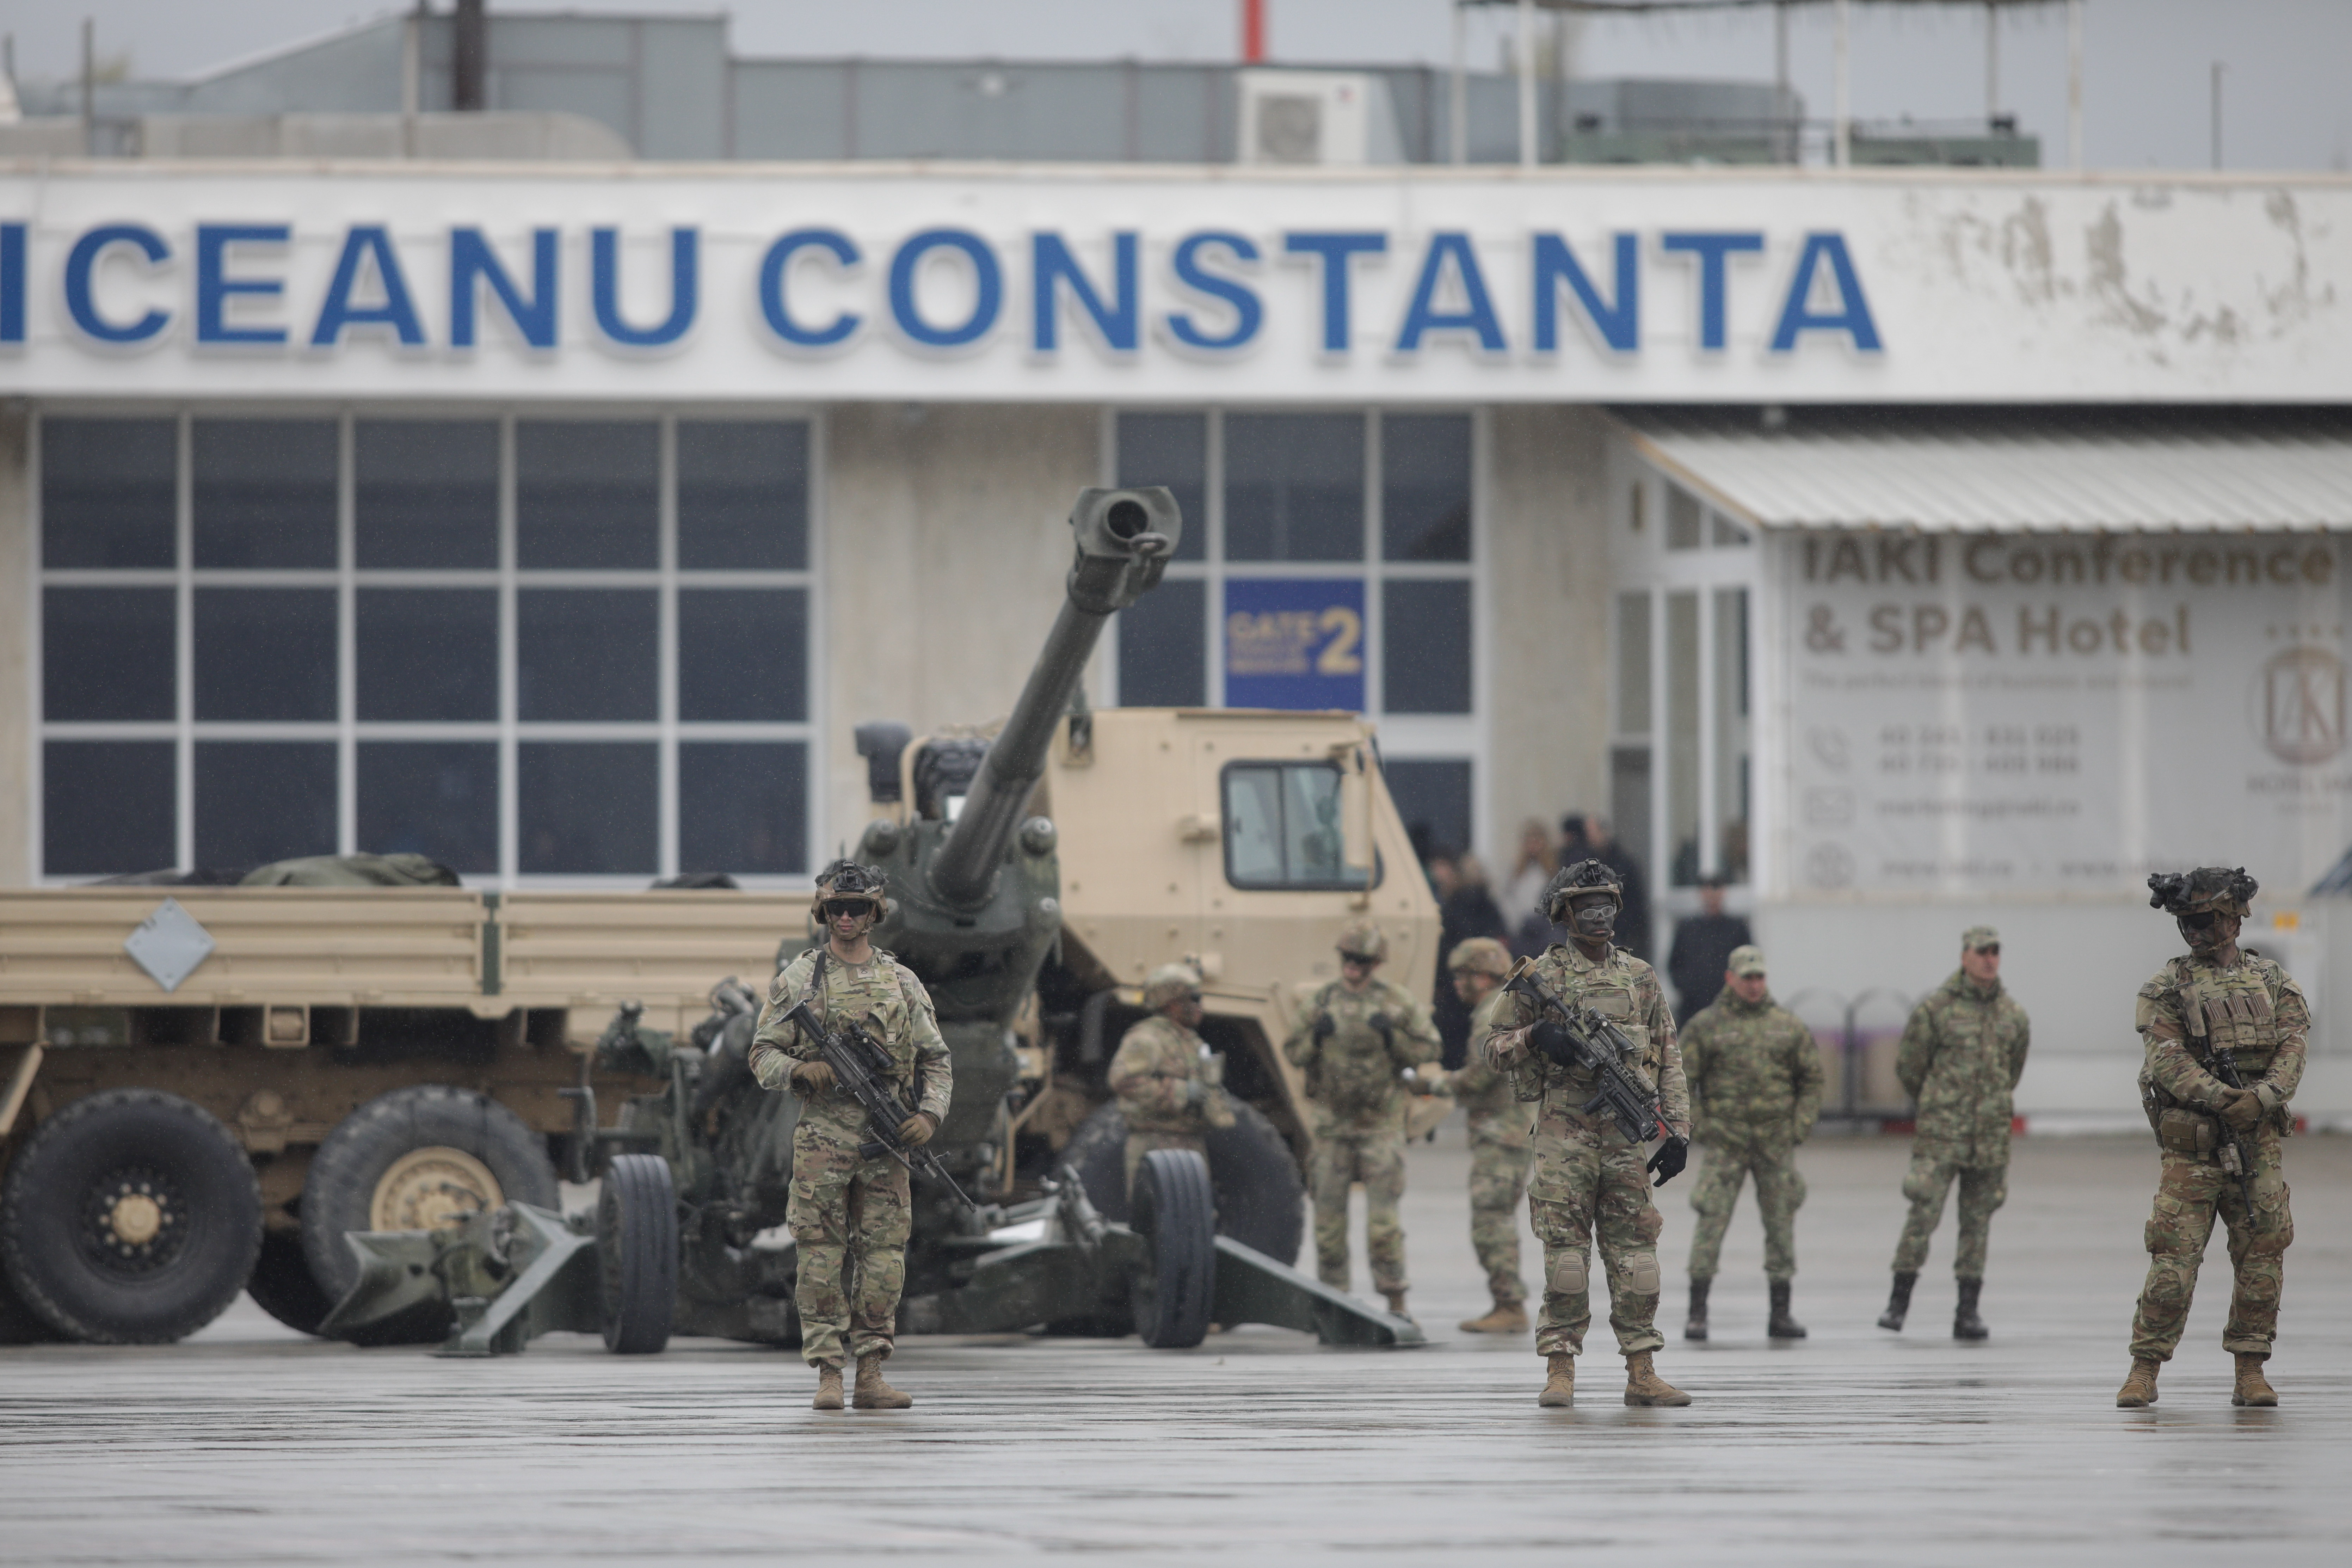 Work starts at largest NATO military base in Europe, set in Romania